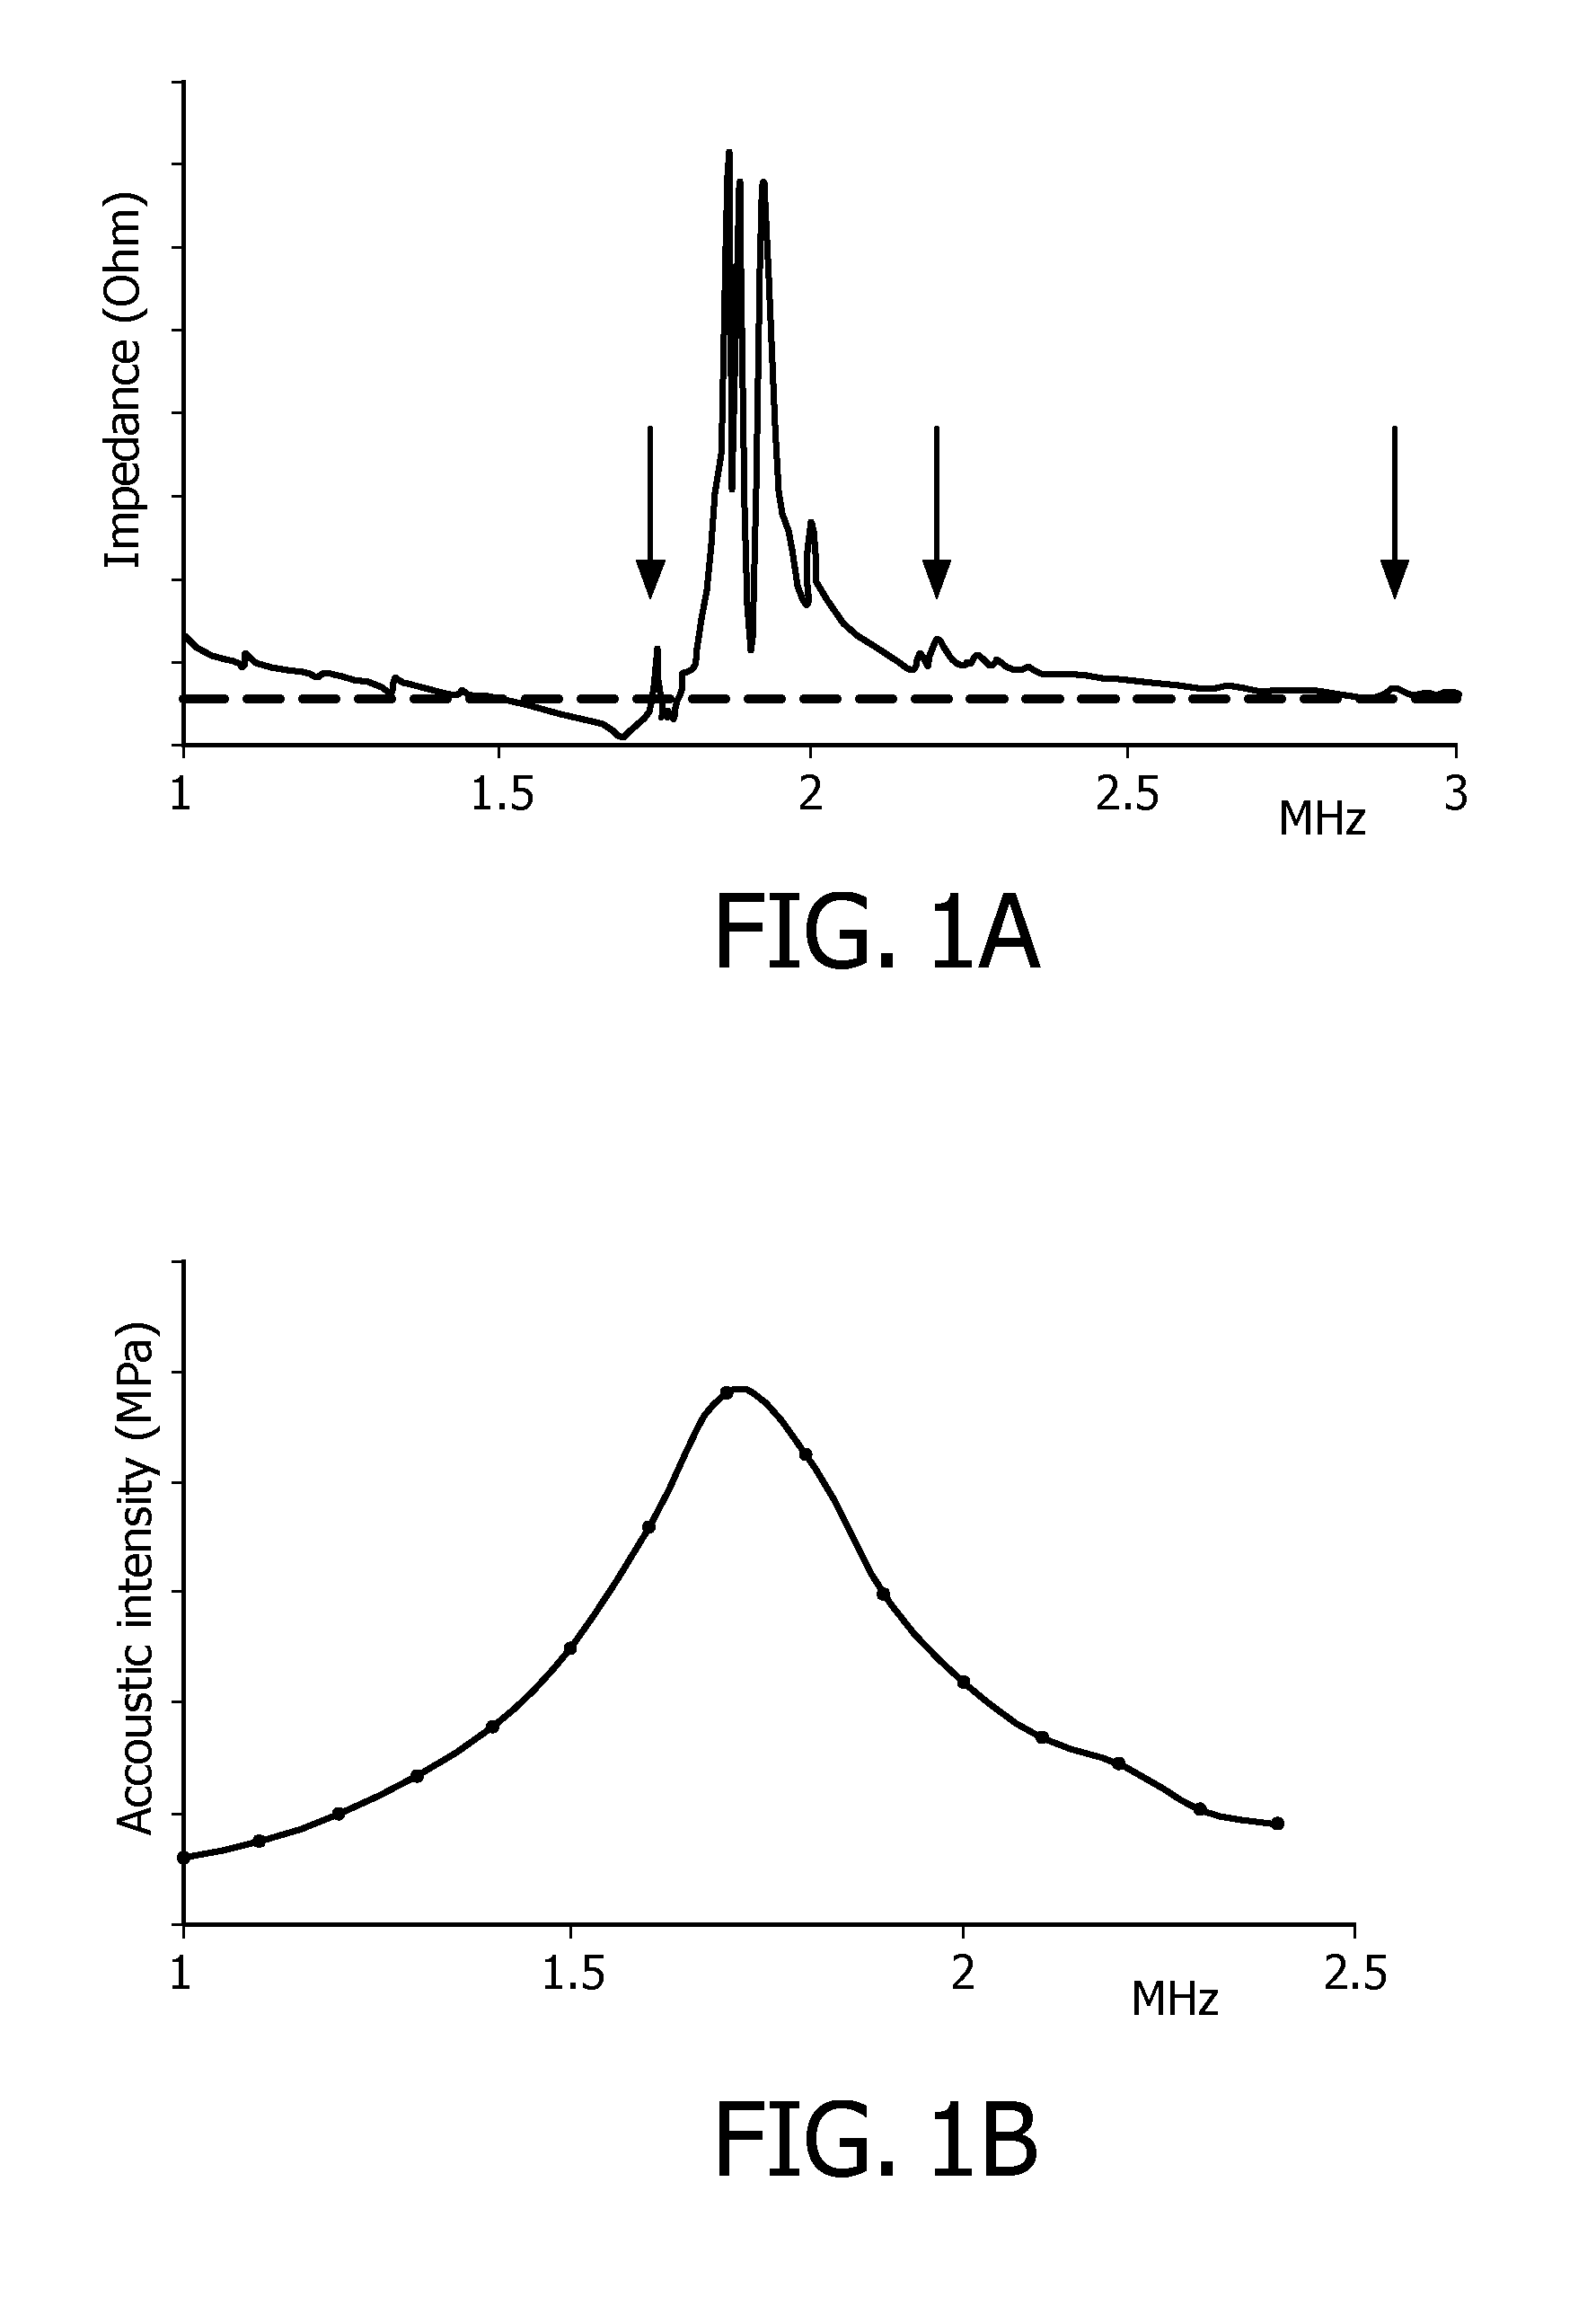 Ultrasound transducer for selectively generating ultrasound waves and heat